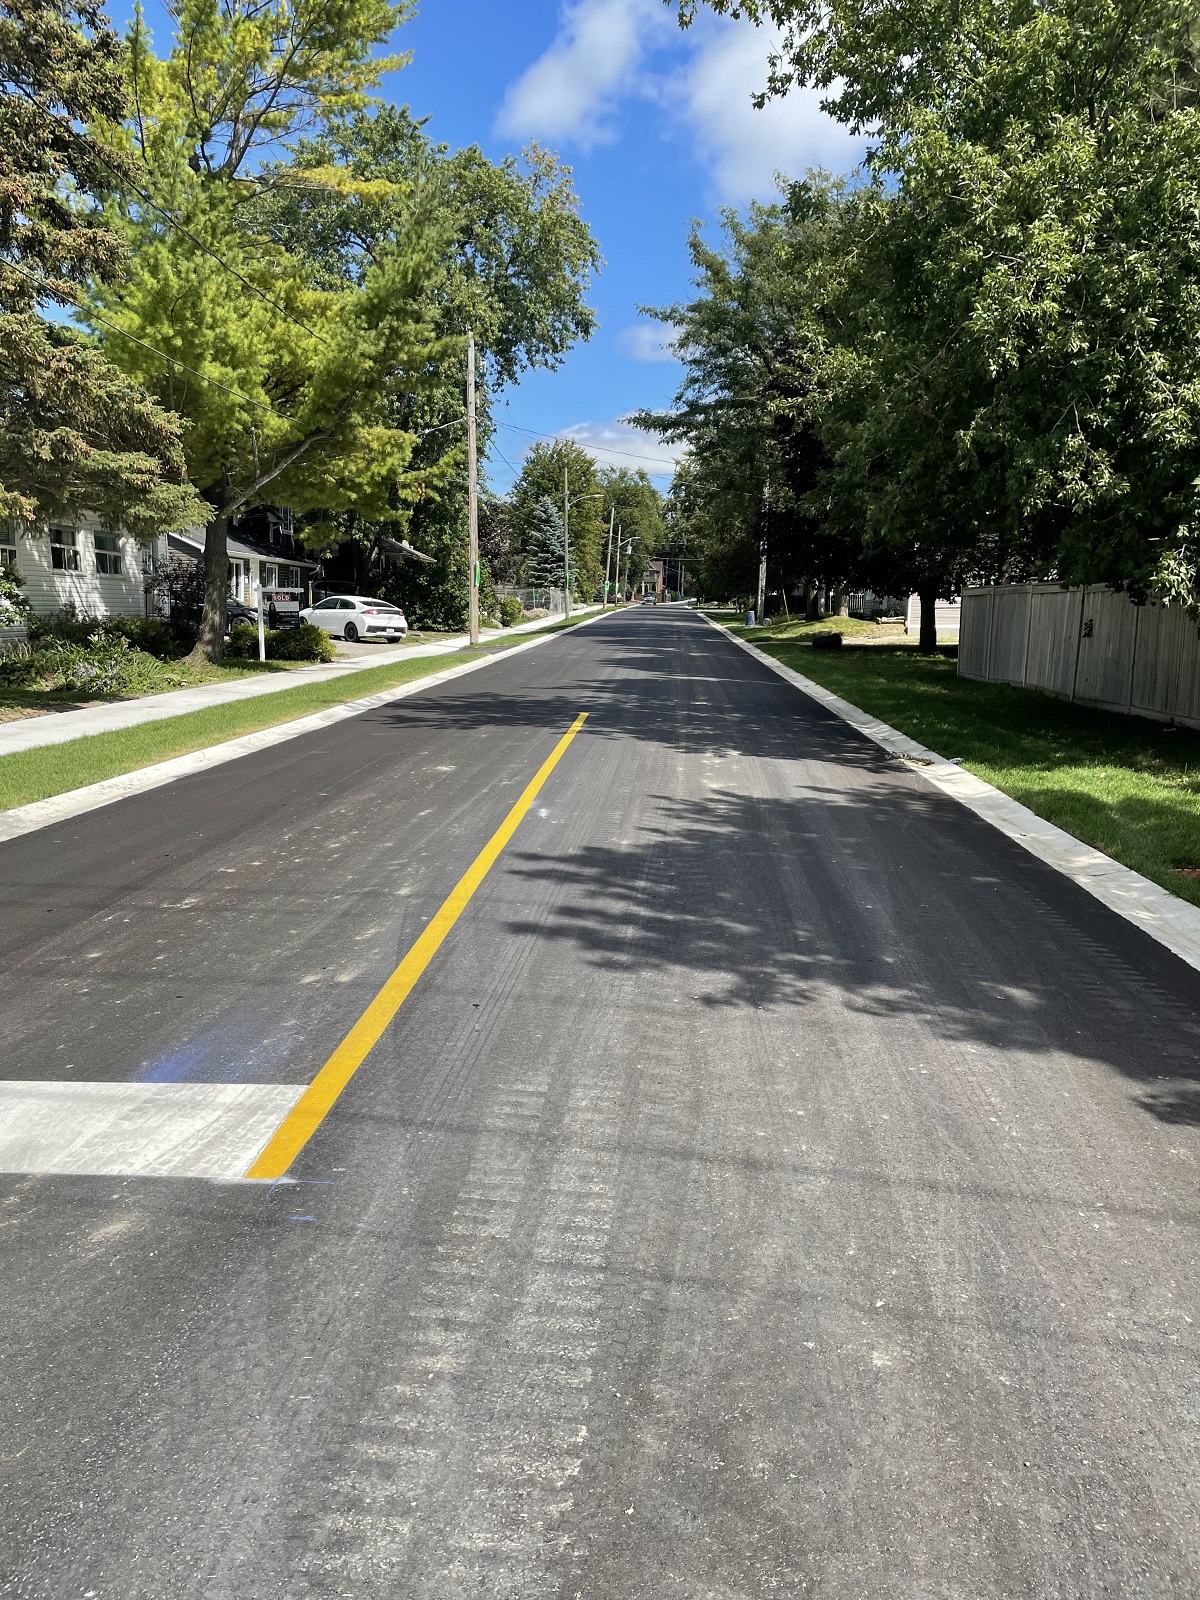 Selby Street, Evelyn Street and Empress Lane, totalling 570 metres of roadway, were upgraded from gravel streets, to smooth asphalt streets with full sidewalks and curbs. 